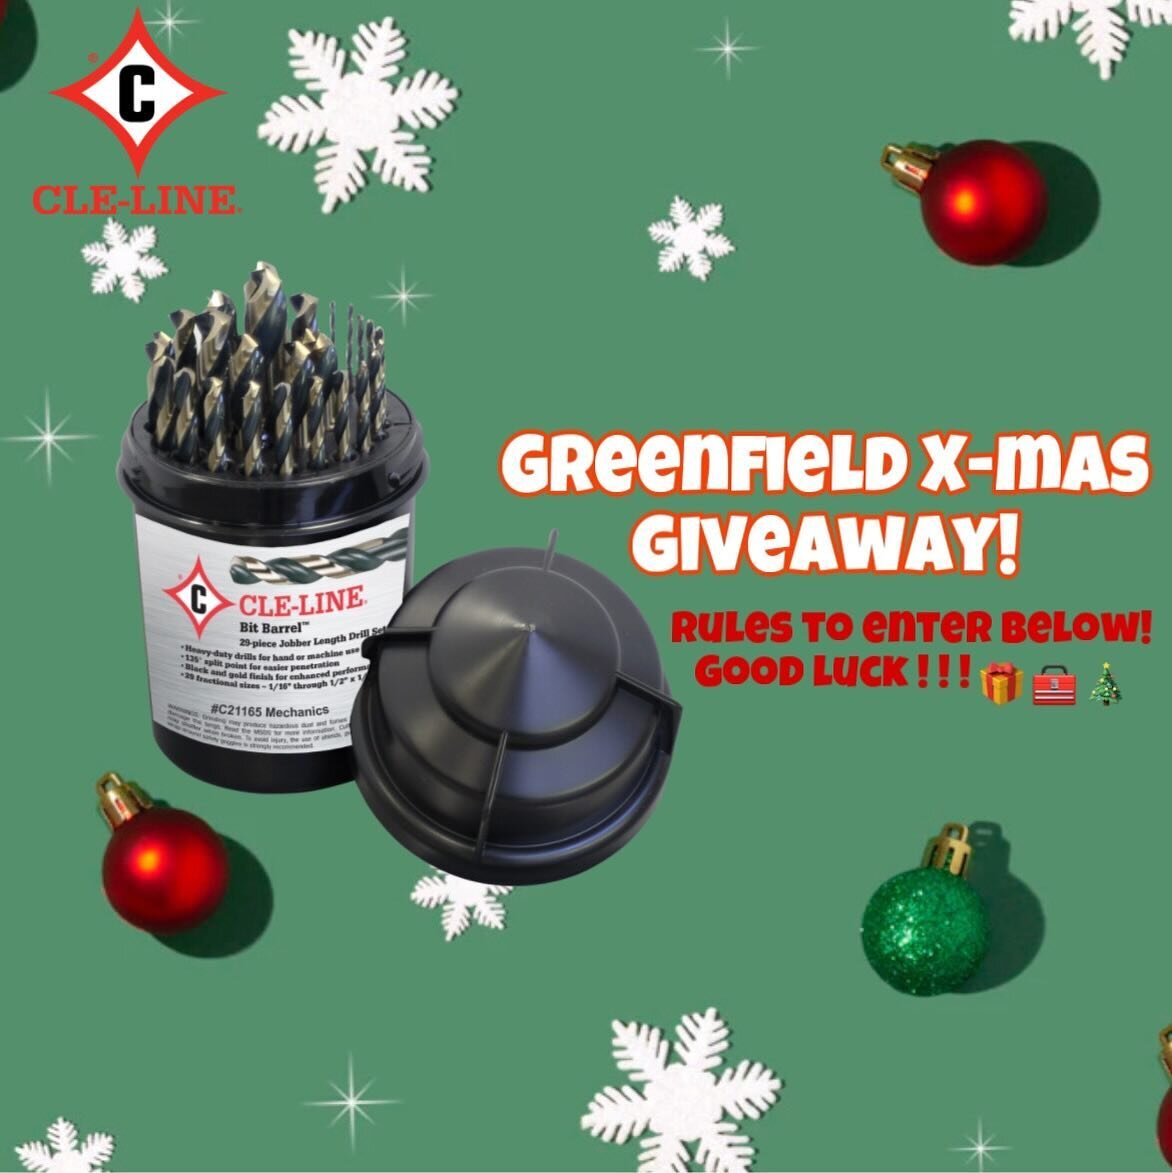 GREENFIELD CHRISTMAS GIVEAWAY!!!&nbsp;🎄🎄🎄
&nbsp;
Christmas is the season of giving, and what better way to give back to all of you than by giving away two of our most popular sets! Follow the rules to enter below to have a chance to win a Chicago 